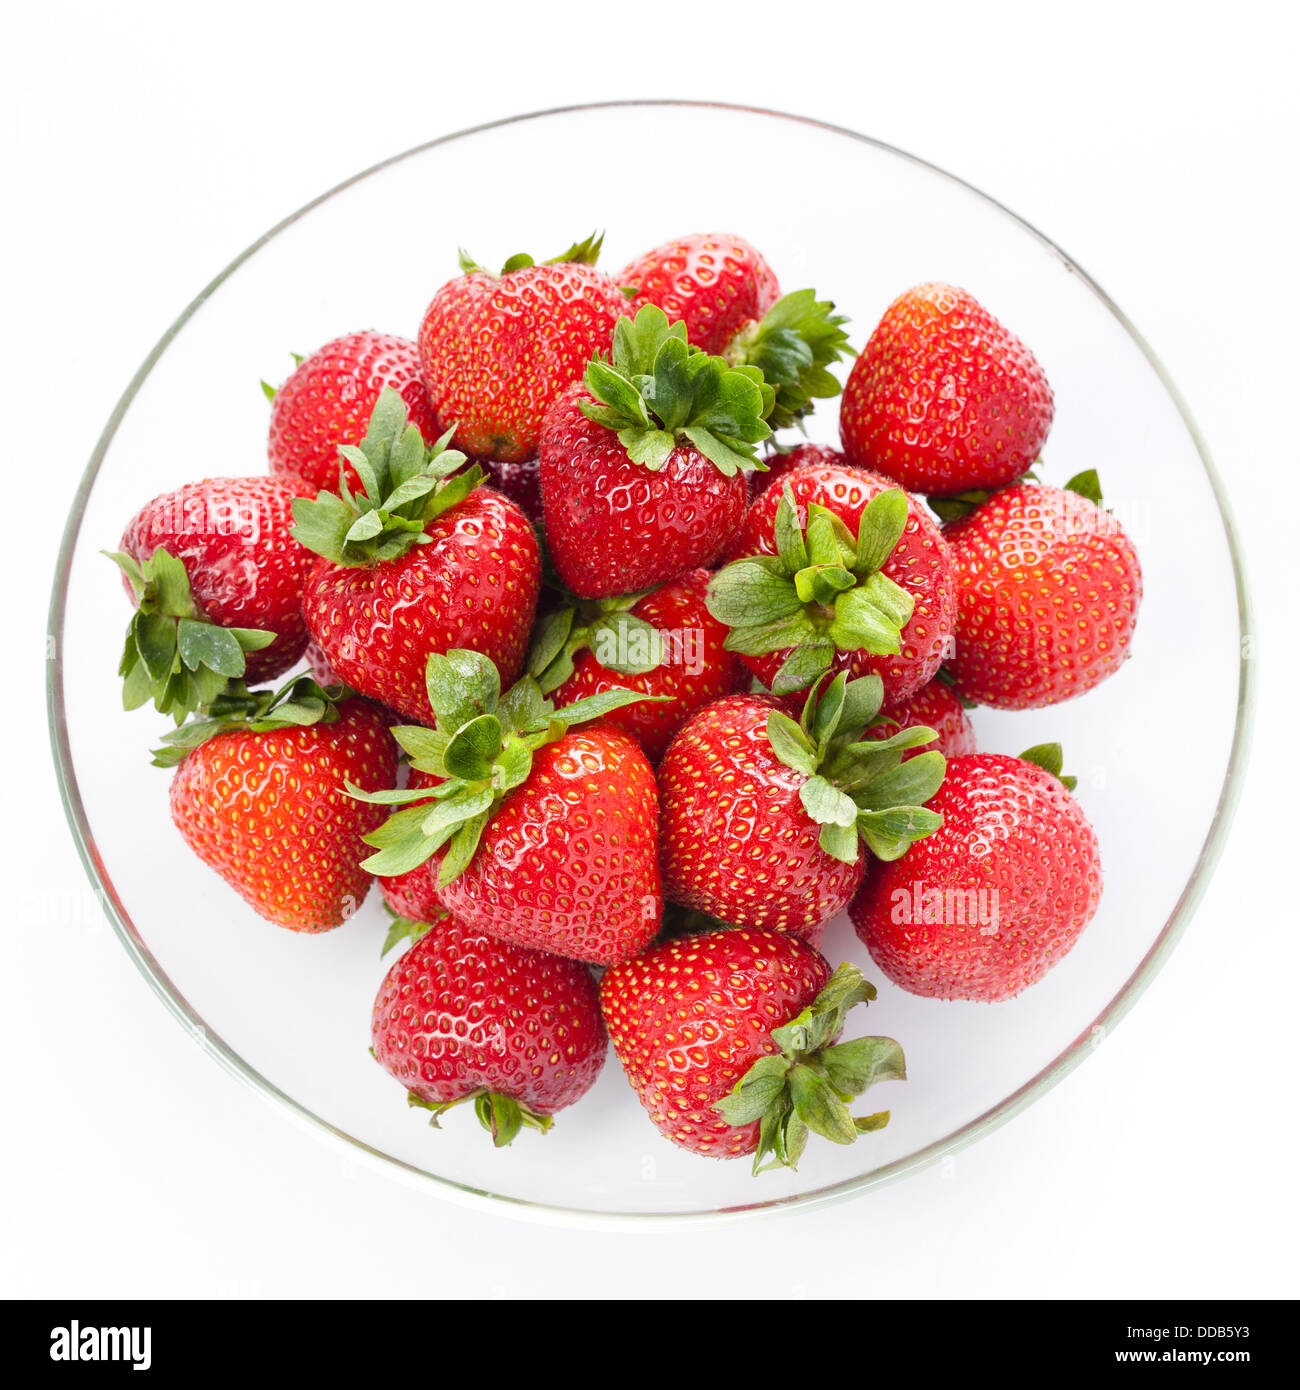 Strawberry in round plate on white background Stock Photo